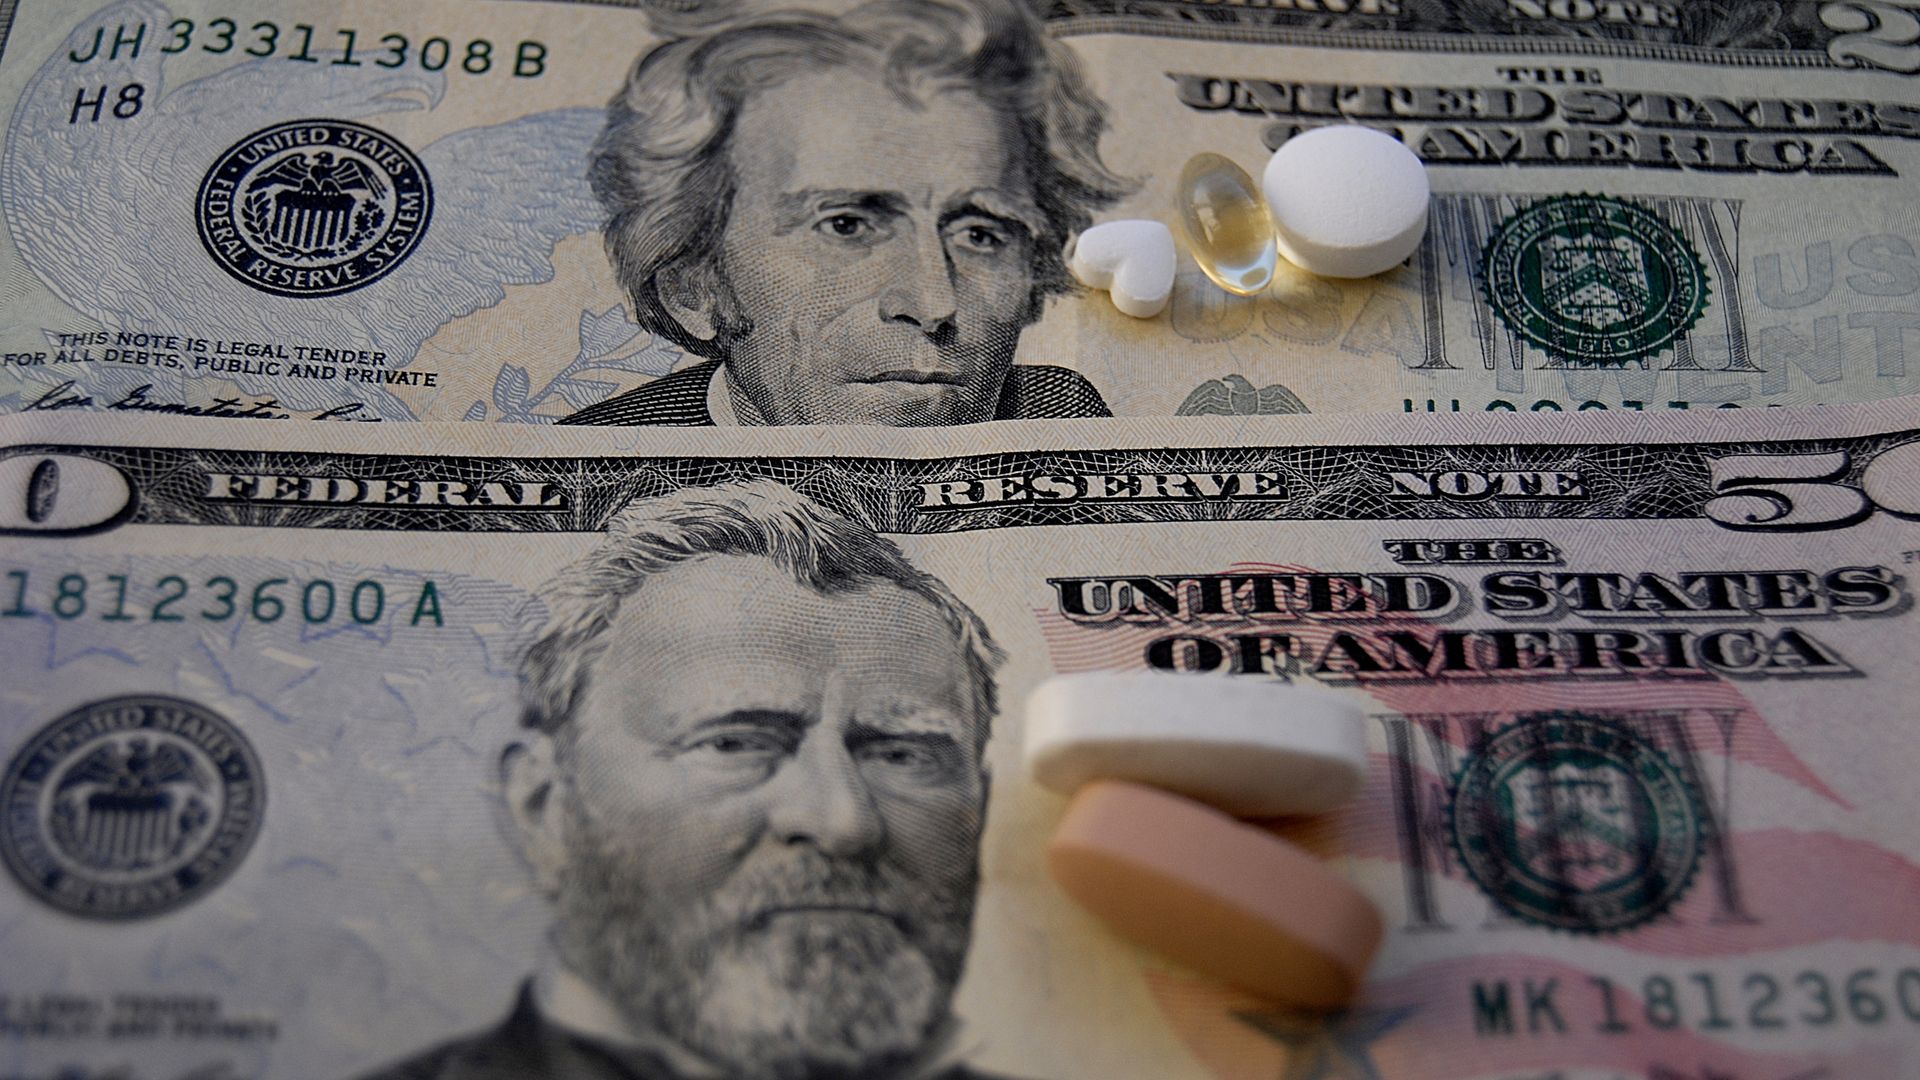 U.S. paper currency and medicine